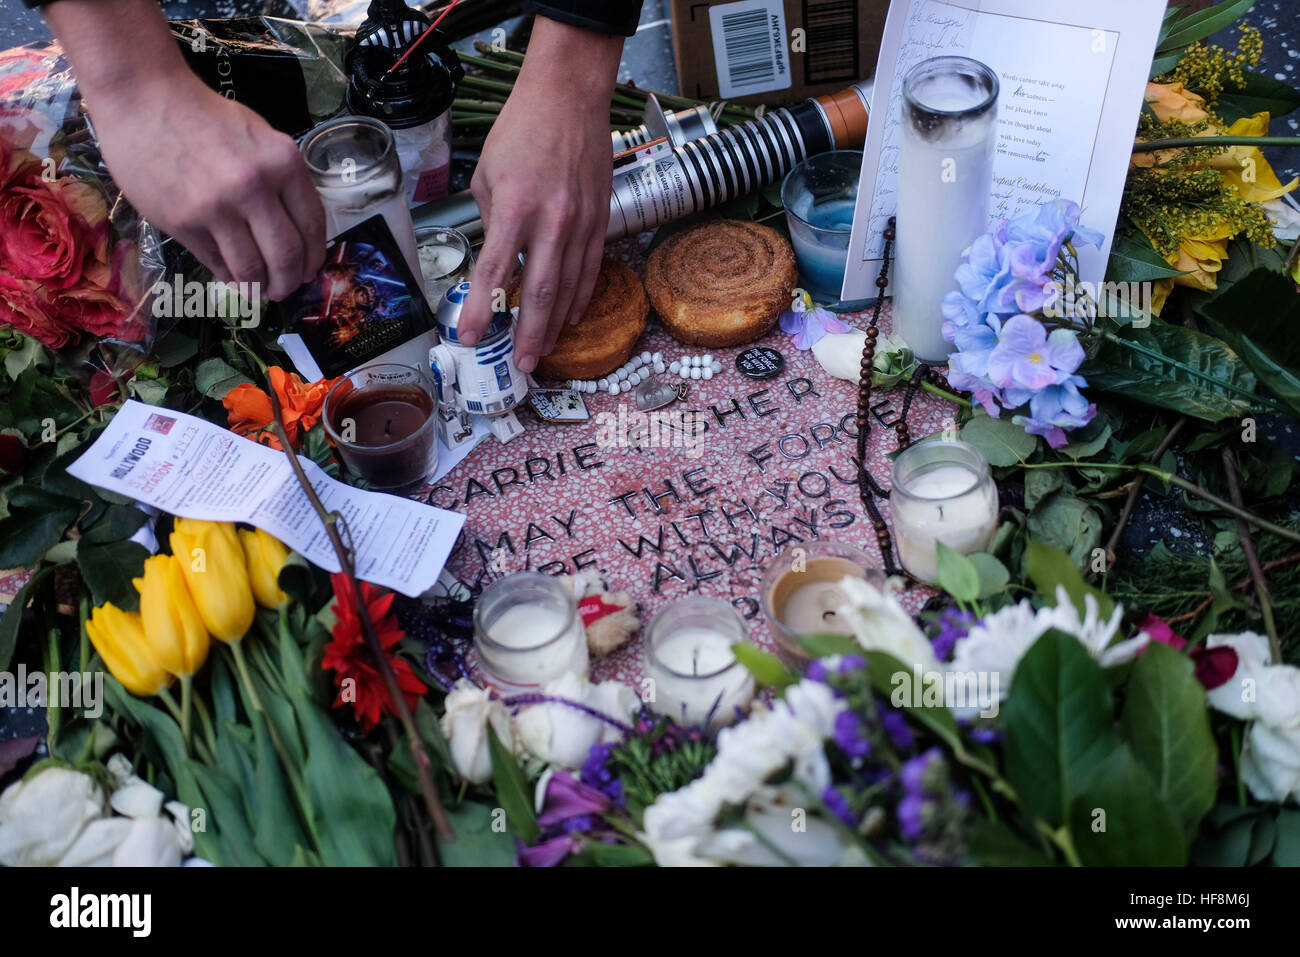 Los Angeles, USA. 29th Dec, 2016. Flowers and candles surround an impromptu memorial created on a blank Hollywood Walk of Fame star by fans of late actress and author Carrie Fisher, in Los Angeles, California, the United States, on Dec. 29, 2016. Hollywood star Debbie Reynolds died of stroke Wednesday at the age of 84, one day after her daughter Carrie Fisher's death. Carrie Fisher, the actress best known as Princess Leia in the 'Star Wars' movie franchise, died at the age of 60 on Tuesday morning, after suffering a heart attack on a flight last Friday. © Zhao Hanrong/Xinhua/Alamy Live News Stock Photo